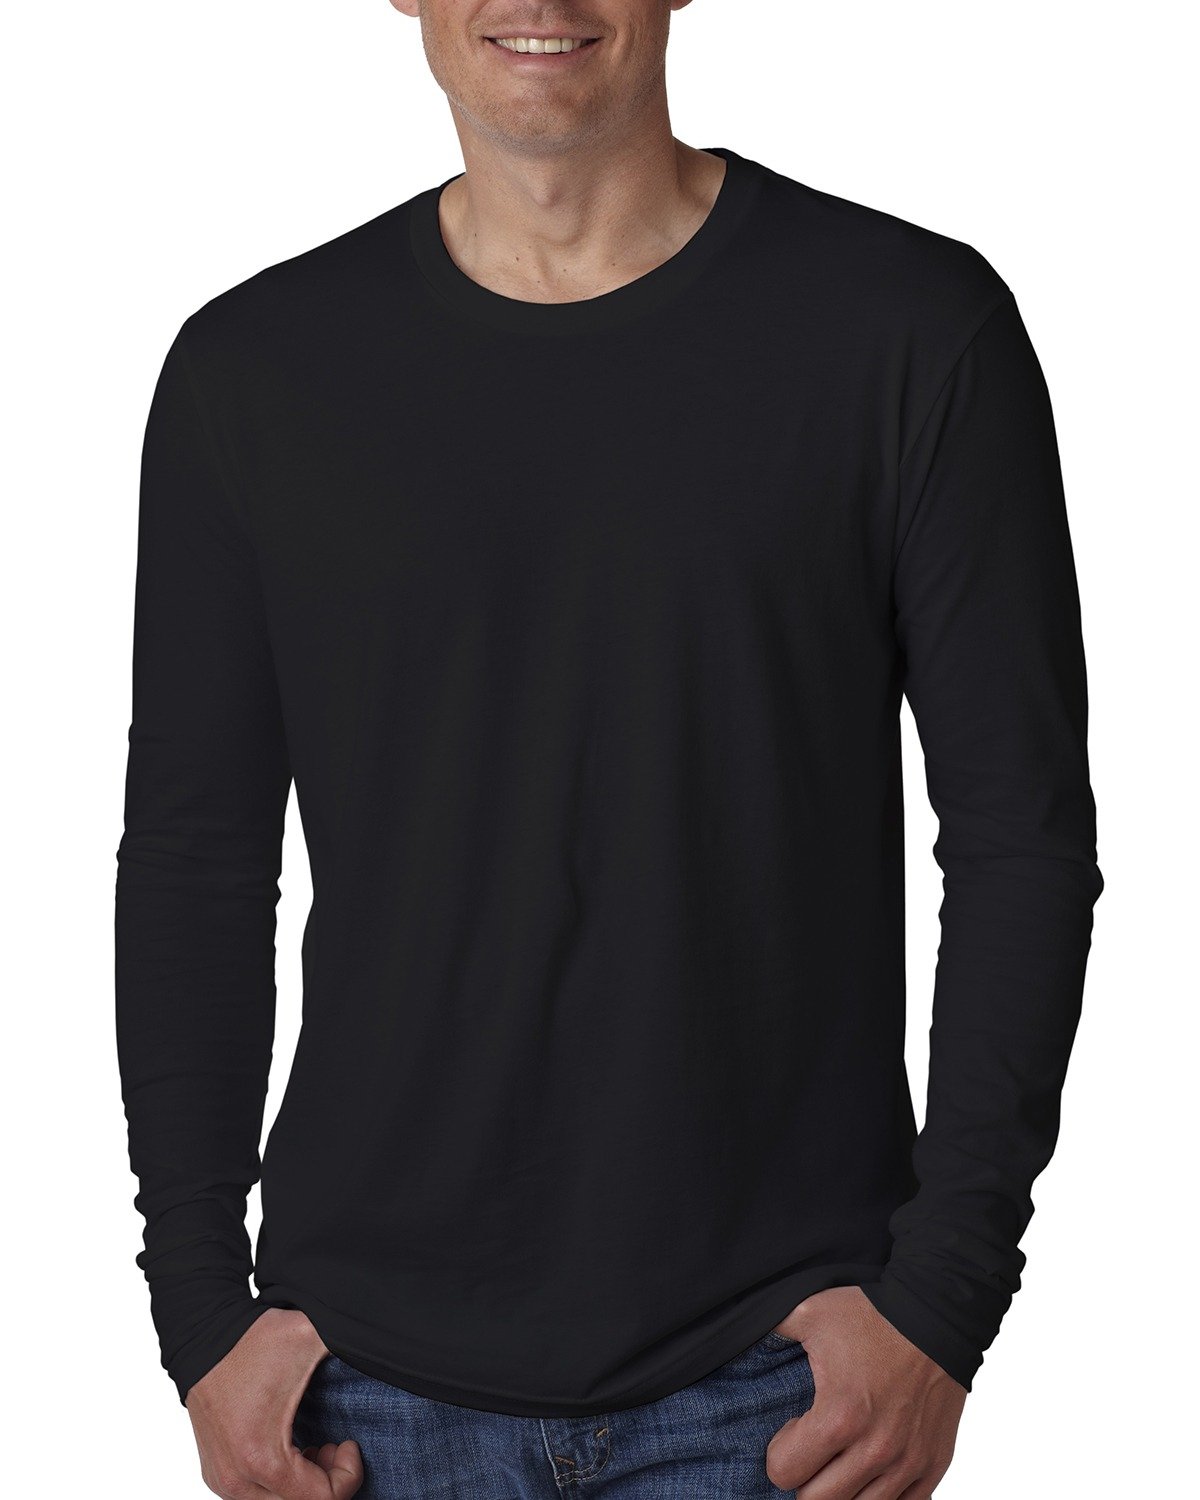 B91xZ Shirts for Men Scoop Neck Long Sleeve Shirts Fitted Tops